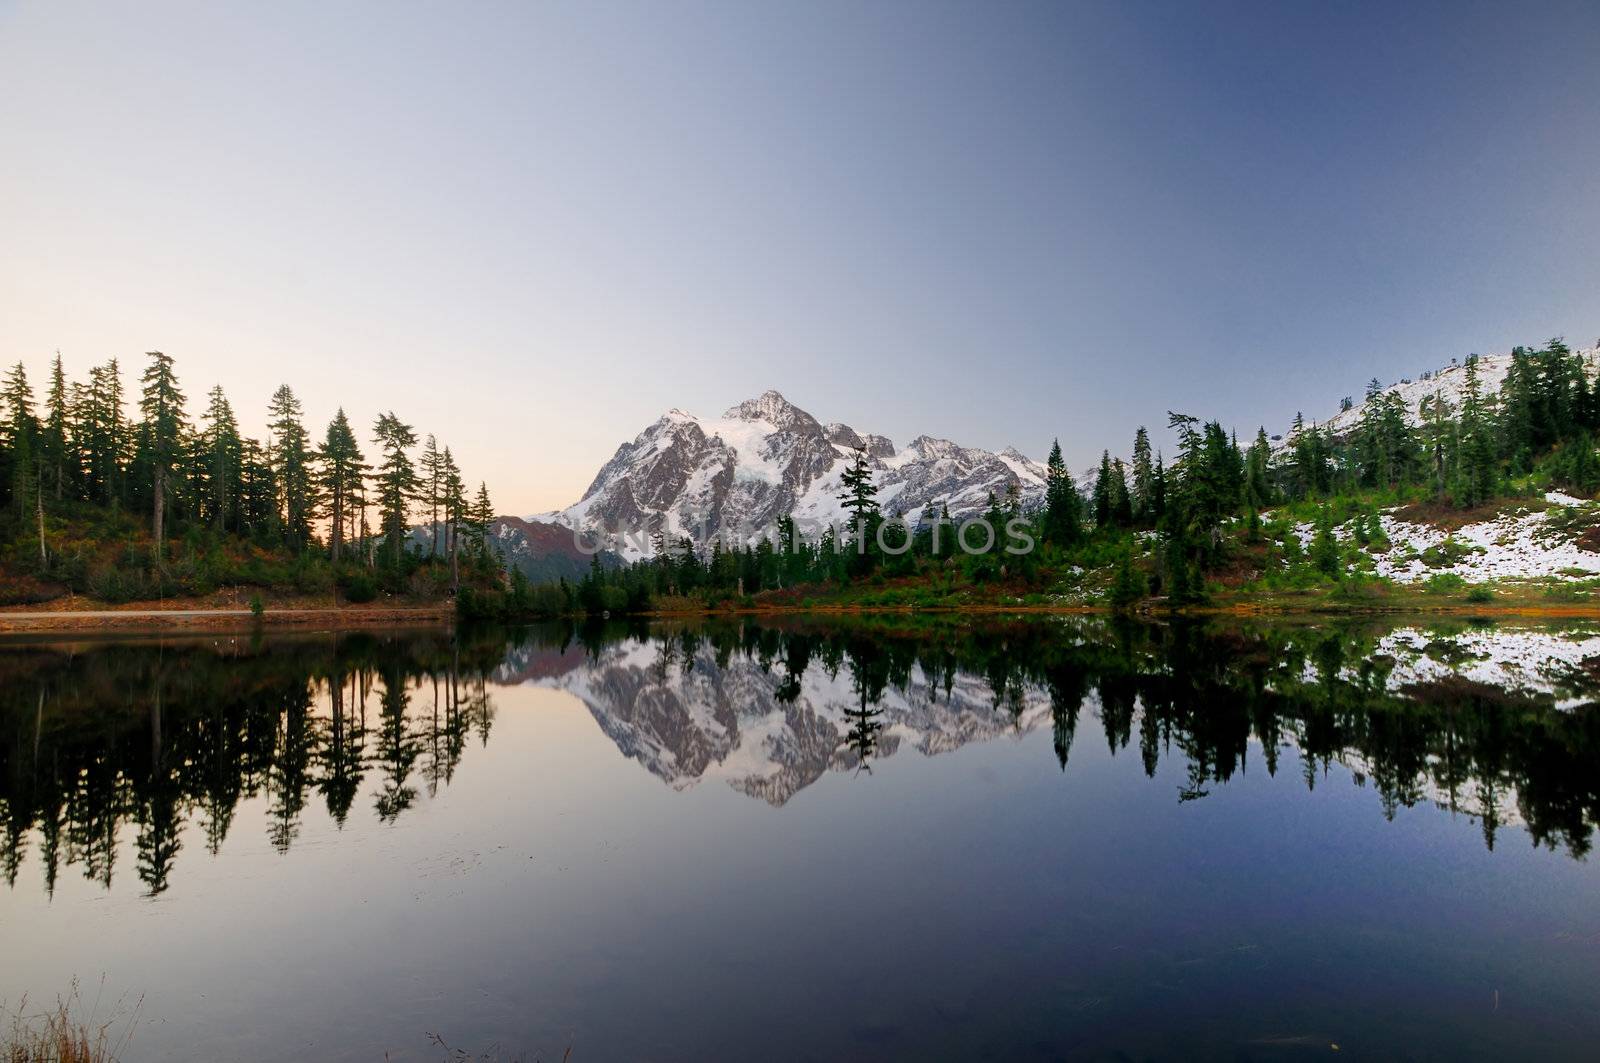 Mt Shuksan after sunset on a clear day projecting a crystal clear mirror image on picture lake